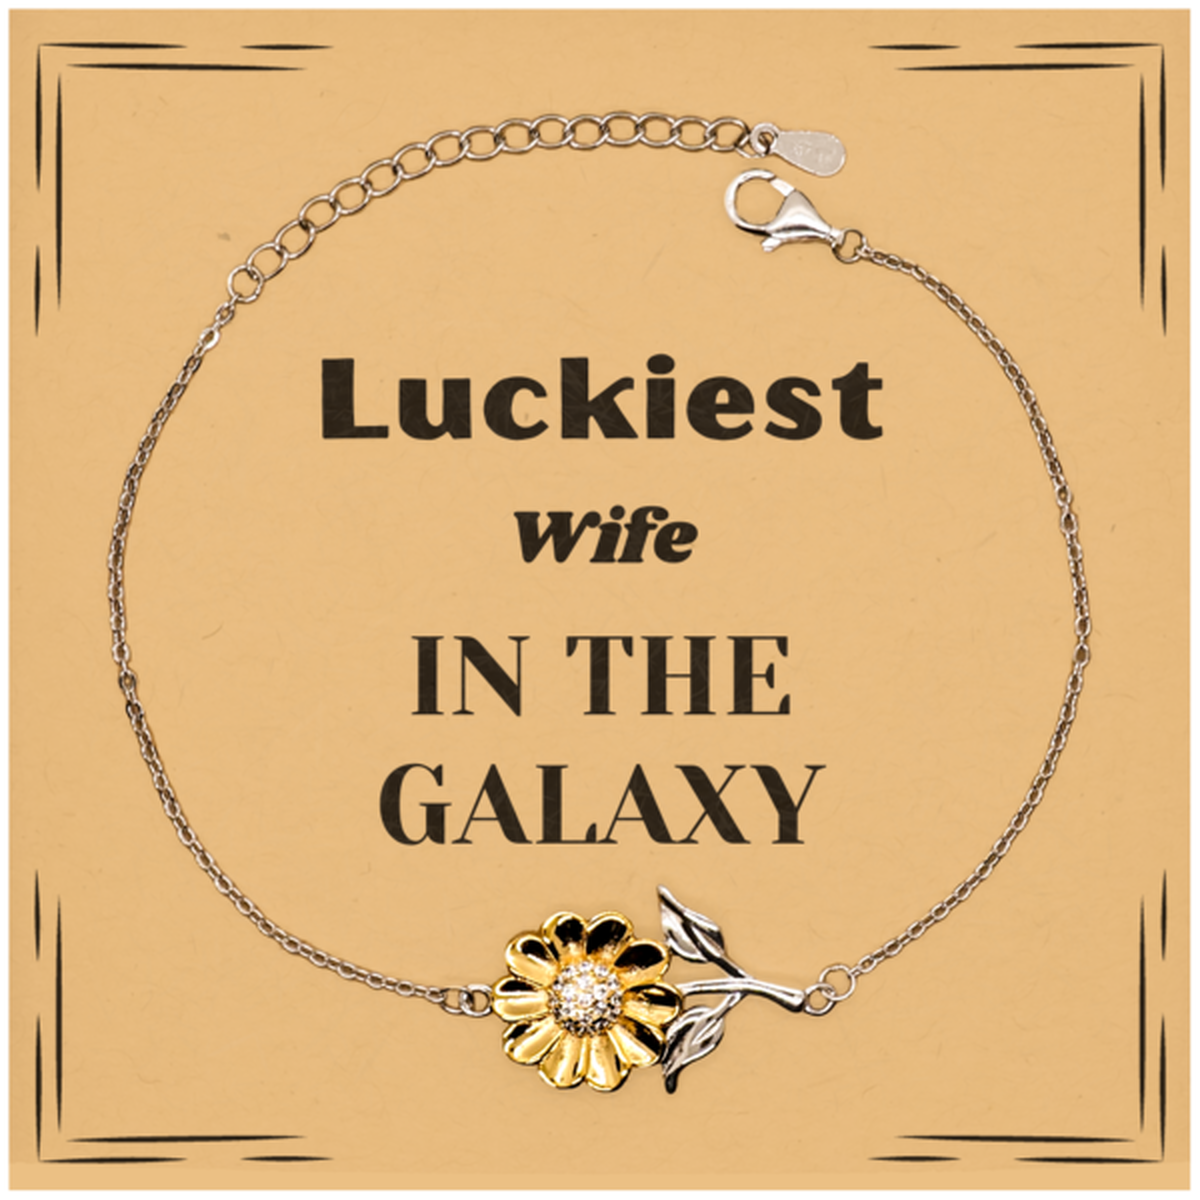 Luckiest Wife in the Galaxy, To My Wife Message Card Gifts, Christmas Wife Sunflower Bracelet Gifts, X-mas Birthday Unique Gifts For Wife Men Women